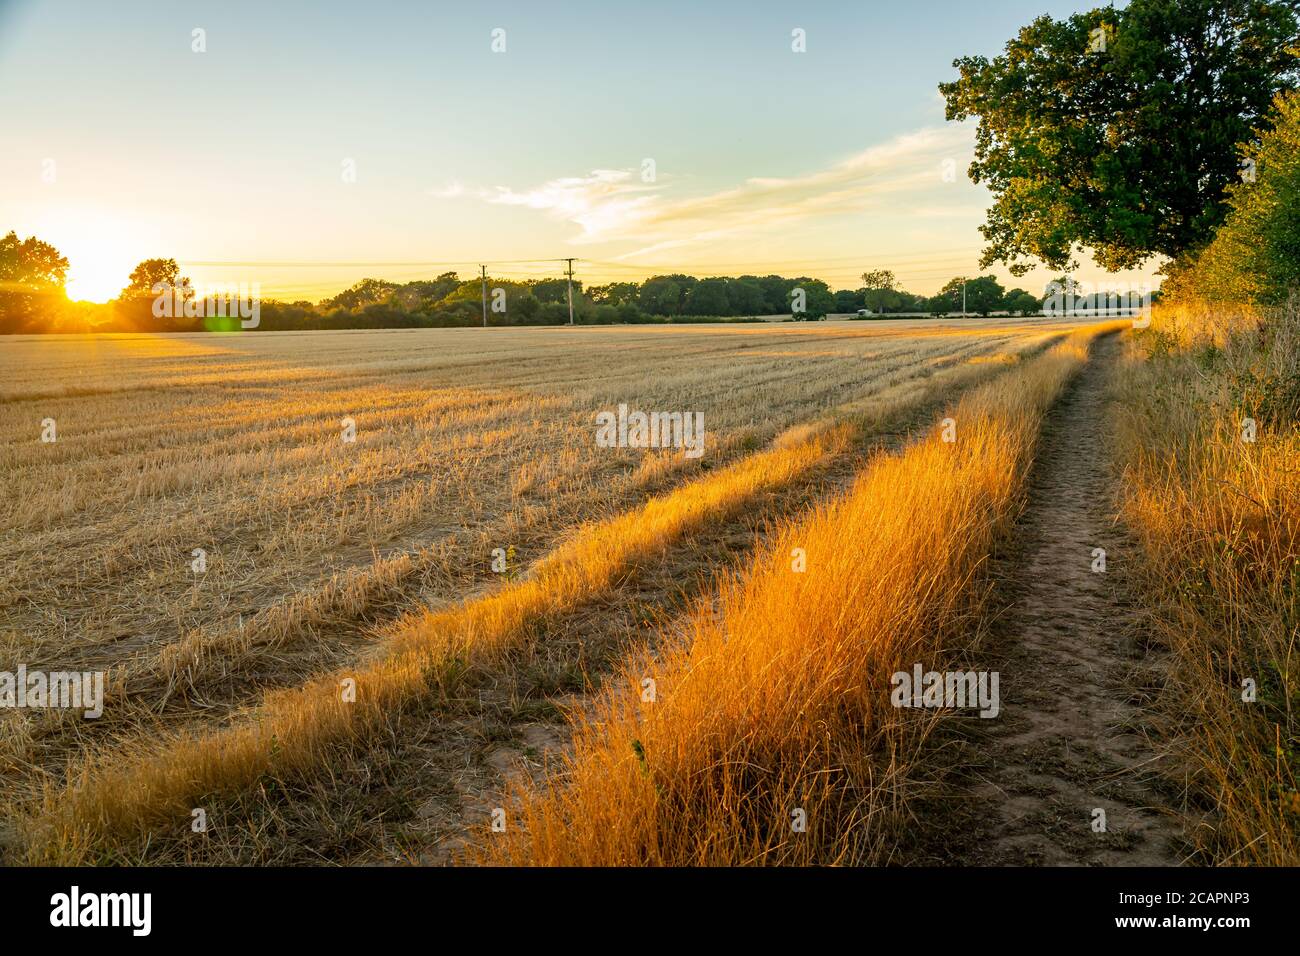 Field margin of a harvested wheat field at dusk Stock Photo